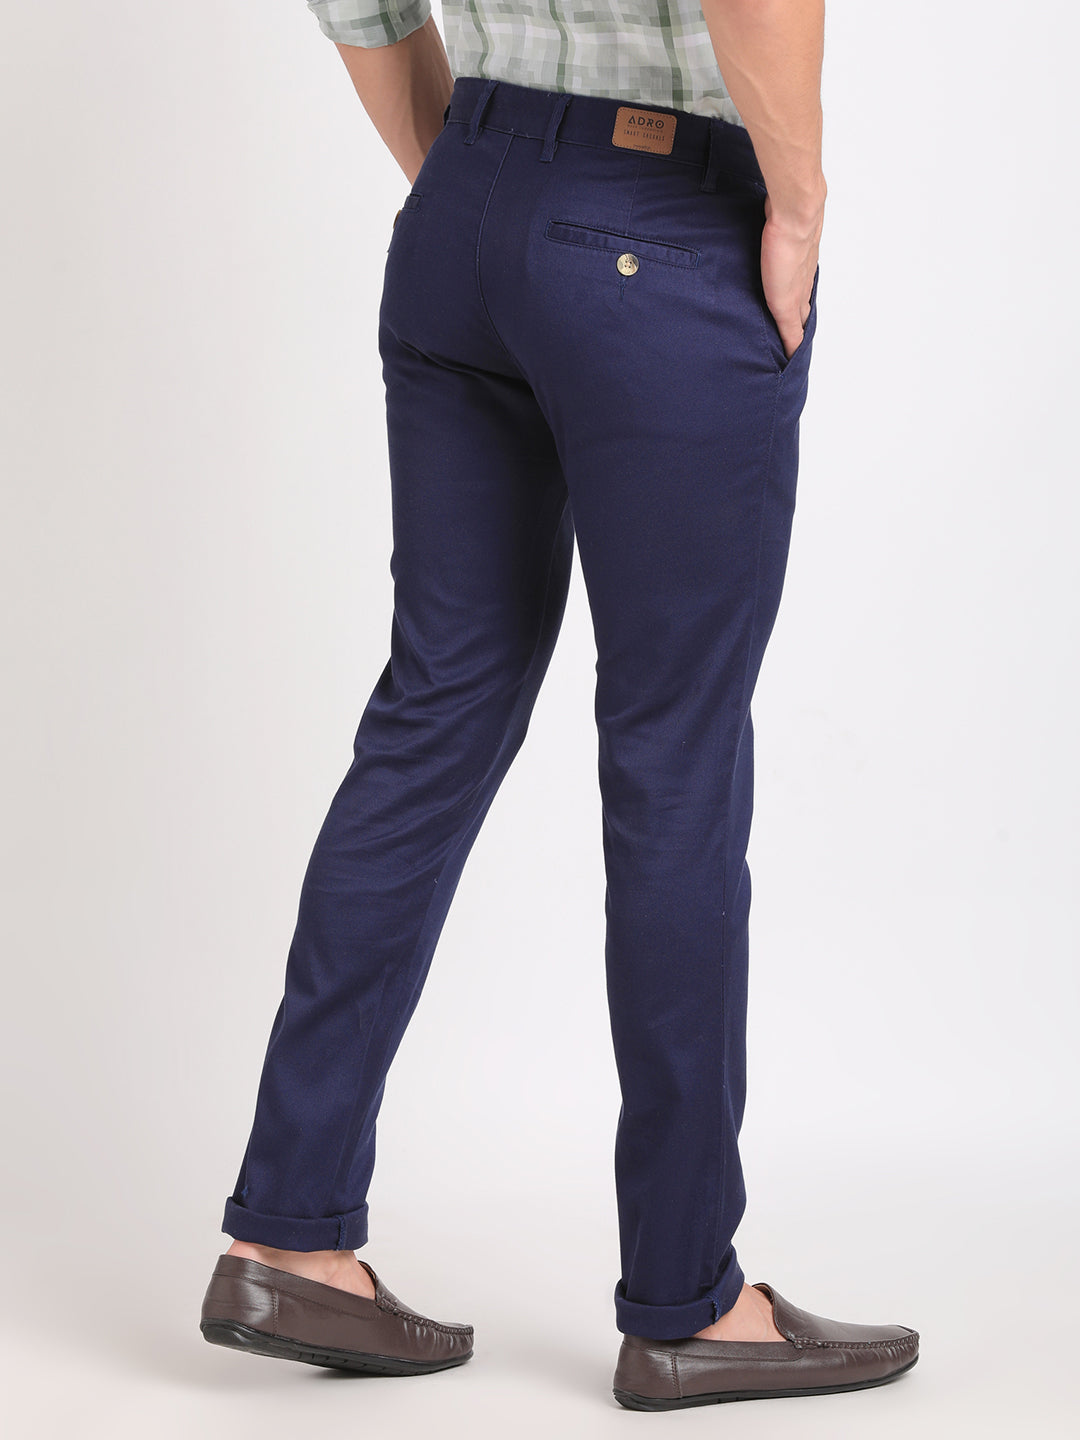 Buy HERE&NOW Men Navy Blue Slim Fit Chinos Trousers - Trousers for Men  15941552 | Myntra